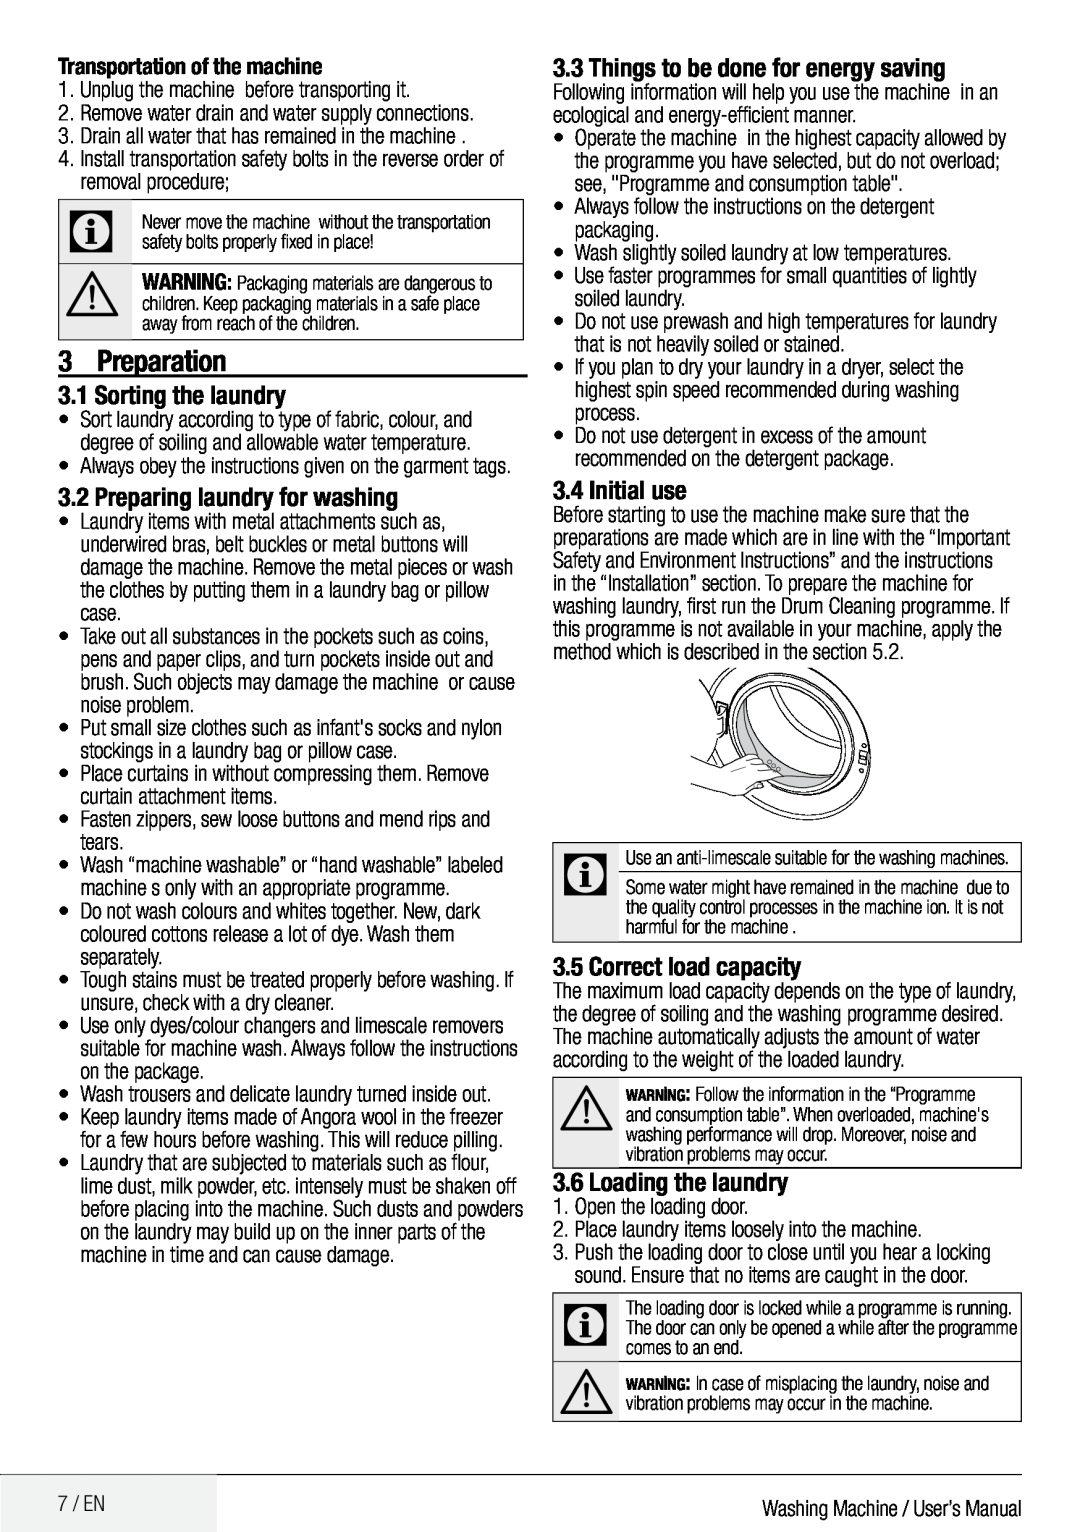 Defy Appliances WMY 81443 MLCM manual Preparation, Sorting the laundry, Preparing laundry for washing, Initial use 